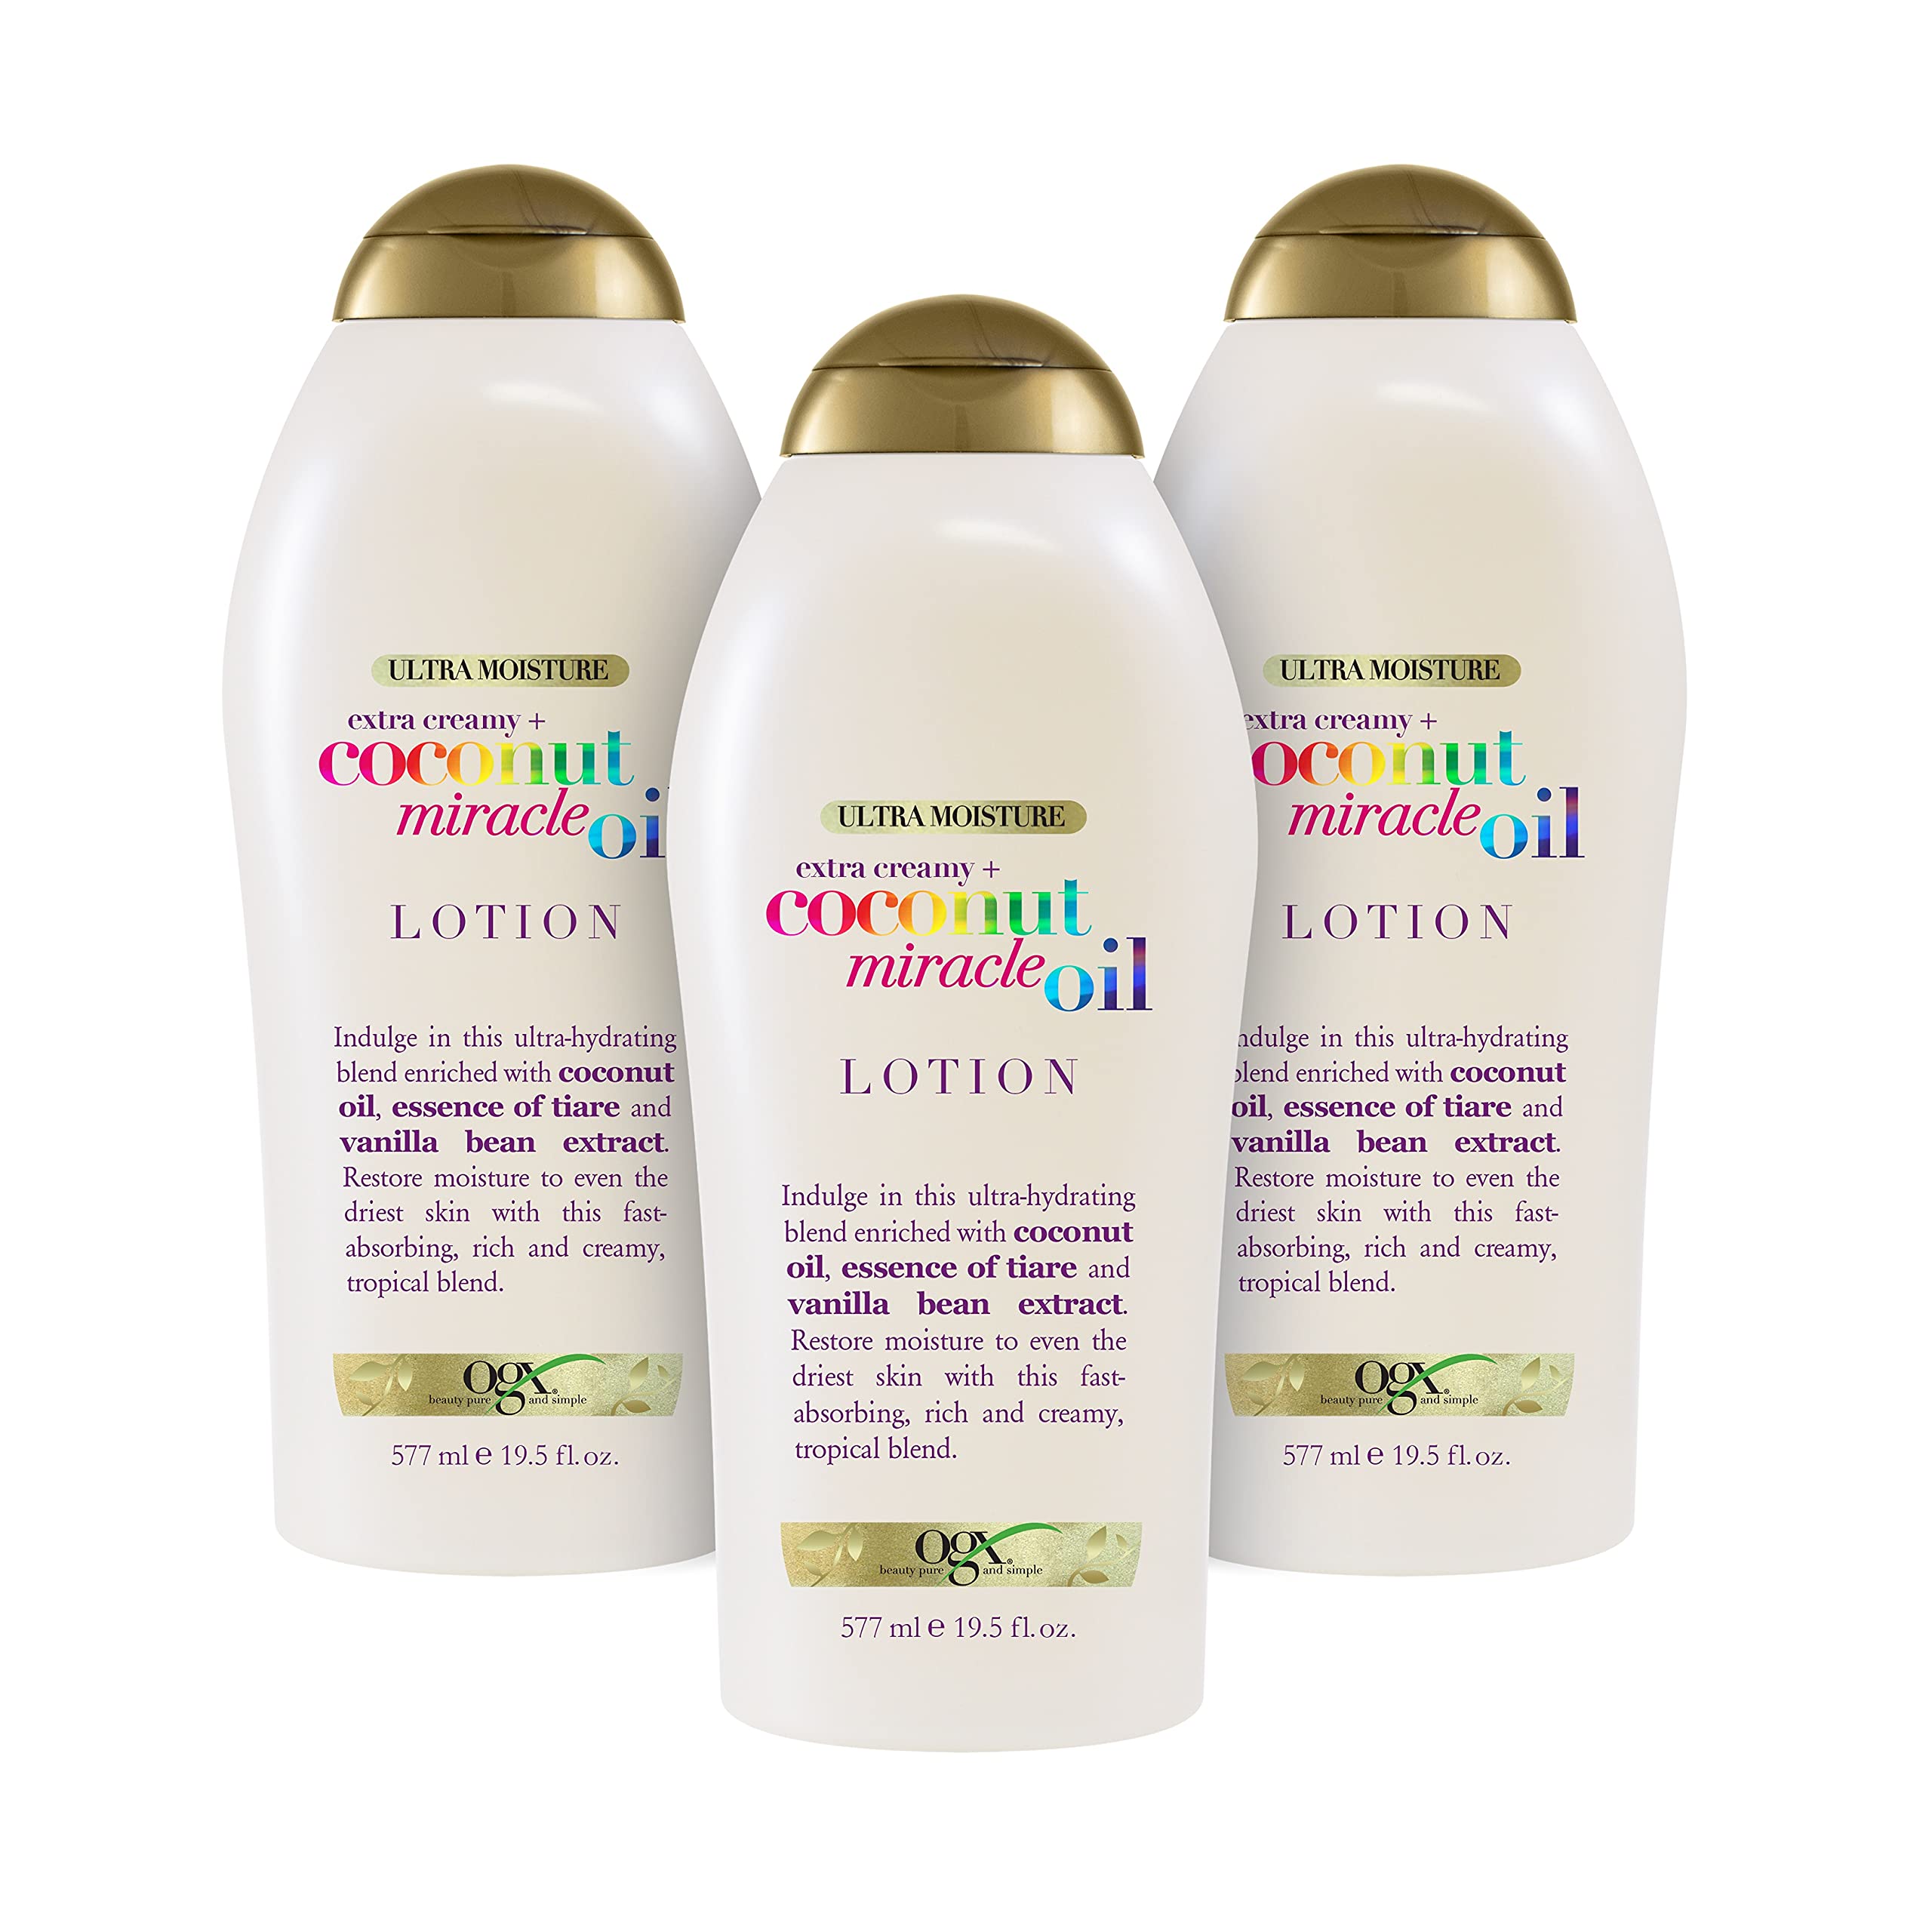 OGX Extra Creamy + Coconut Miracle Oil Ultra Moisture Lotion, 19.5 Ounce (Pack of 3)